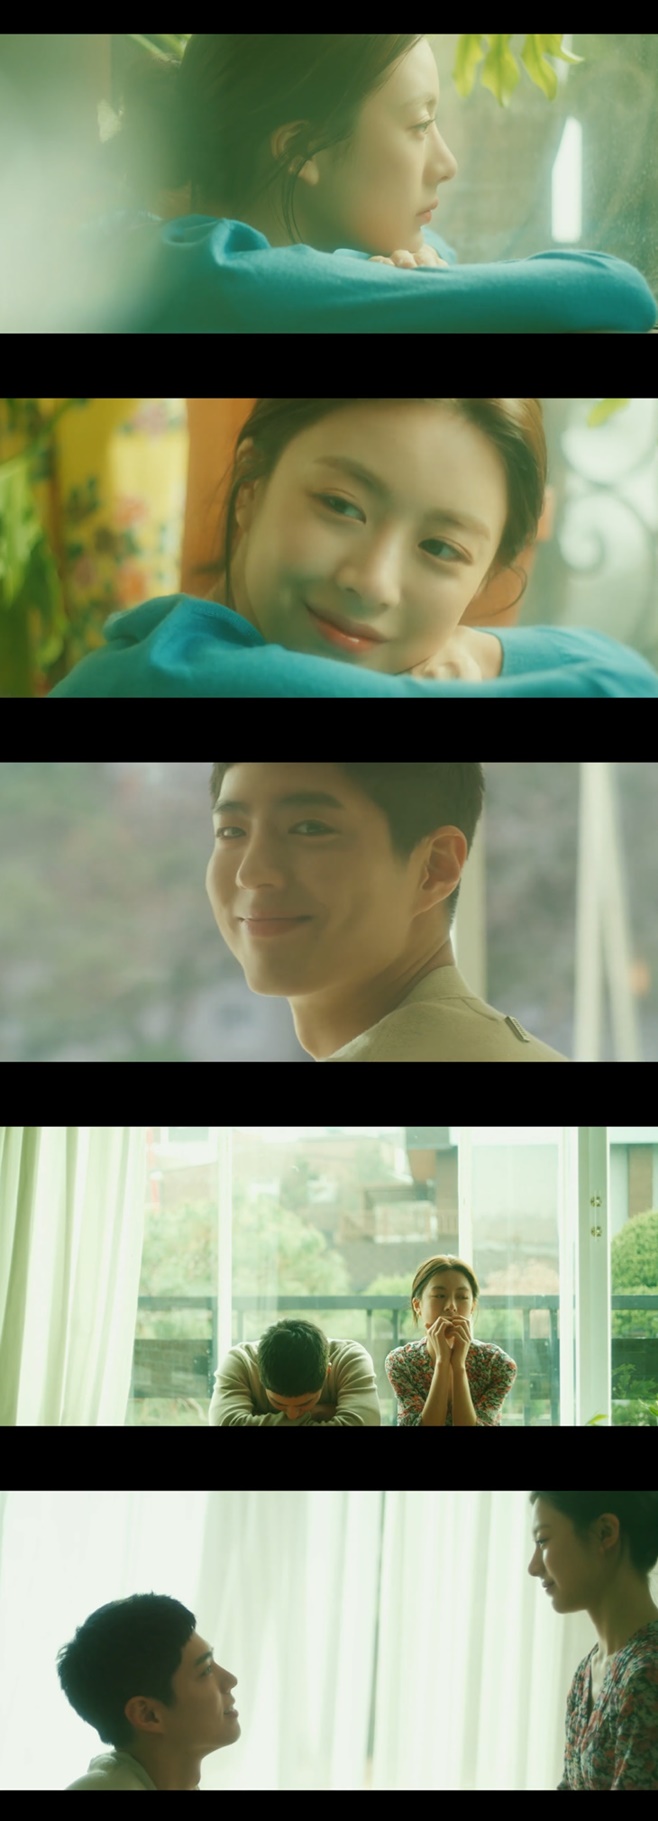 Actor Park Bo-gum and Go Yoon-jung hit the I love you a lot couple co-work.On the 20th, the music video and music video of the webtoon Moonlight Sculptor OST I Love You a lot were released.Singer Lee Seung-chul is singing I Love You a lot, and Actor Park Bo-gum and new Go Yon-jung starred in the music video to gather topics.Park Bo-gum and Go Yoon-jung in the music video are attracting favorable reviews with their hearty yet fond Chemie and melodramatic emotions combined with the song.On the other hand, Moonlight Sculptor is a webtoon that depicts the story of the main character in a virtual reality game choosing a job called Moonlight Sculptor, which sculpts the moonlight.